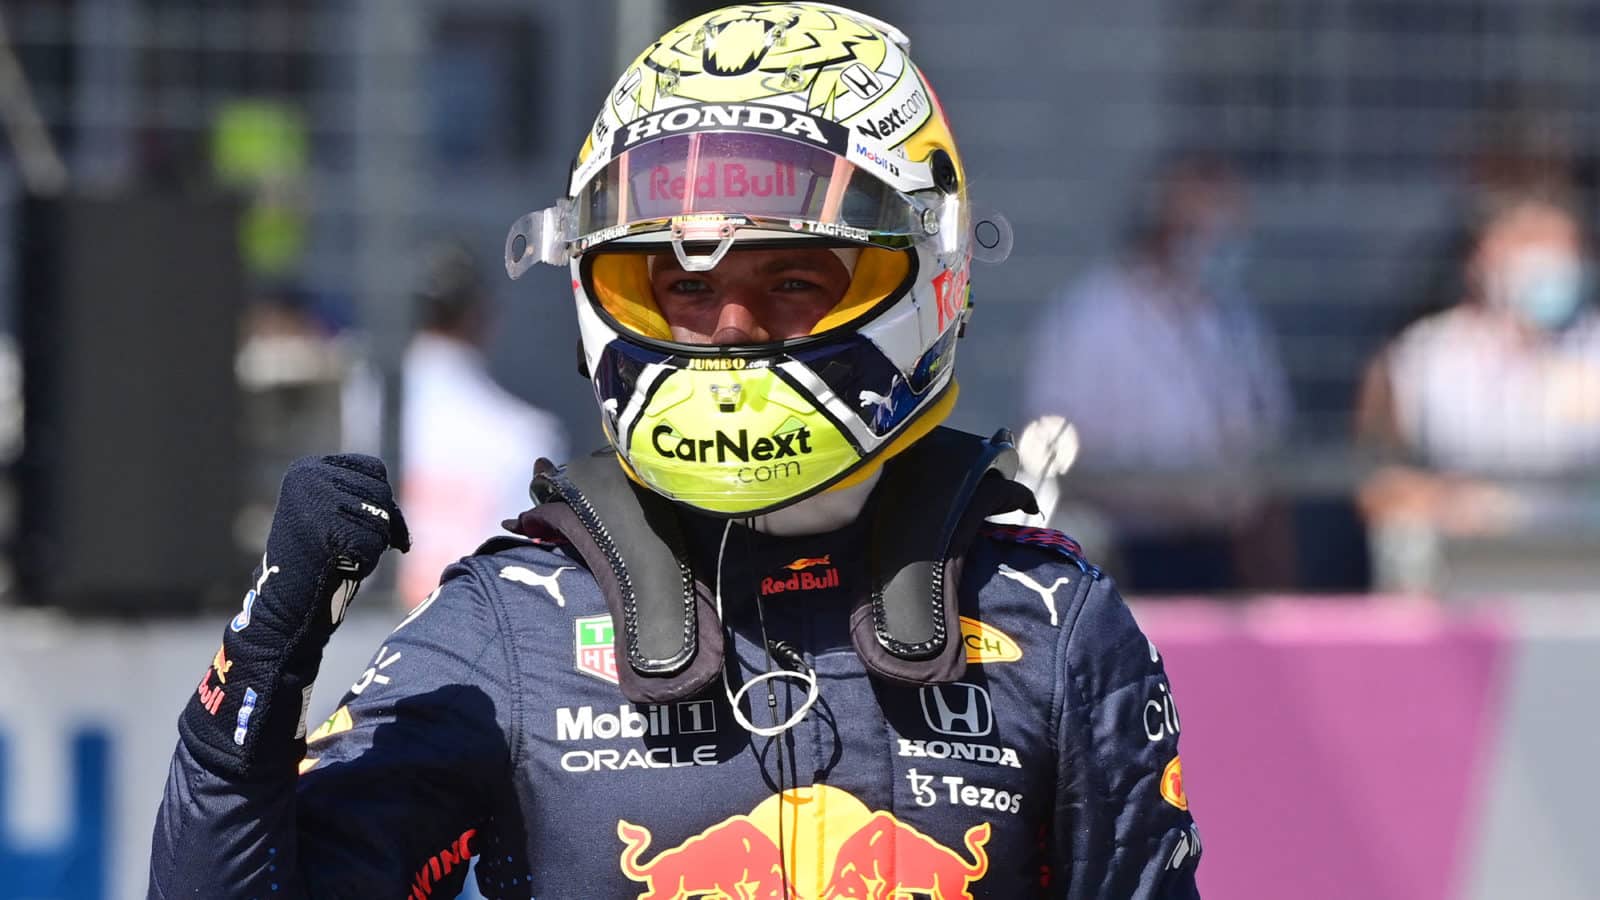 Red Bull's Dutch driver Max Verstappen celebrates after taking the pole position after the qualifying session at the Red Bull Ring race track in Spielberg, Austria, on June 26, 2021, ahead of the Formula One Styrian Grand Prix. (Photo by ANDREJ ISAKOVIC / AFP) (Photo by ANDREJ ISAKOVIC/AFP via Getty Images)